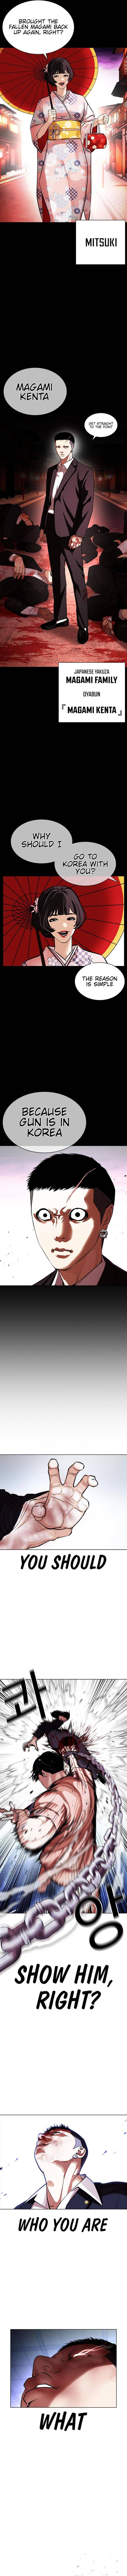 Lookism, Ch. 385 - Chapter 385 image 12